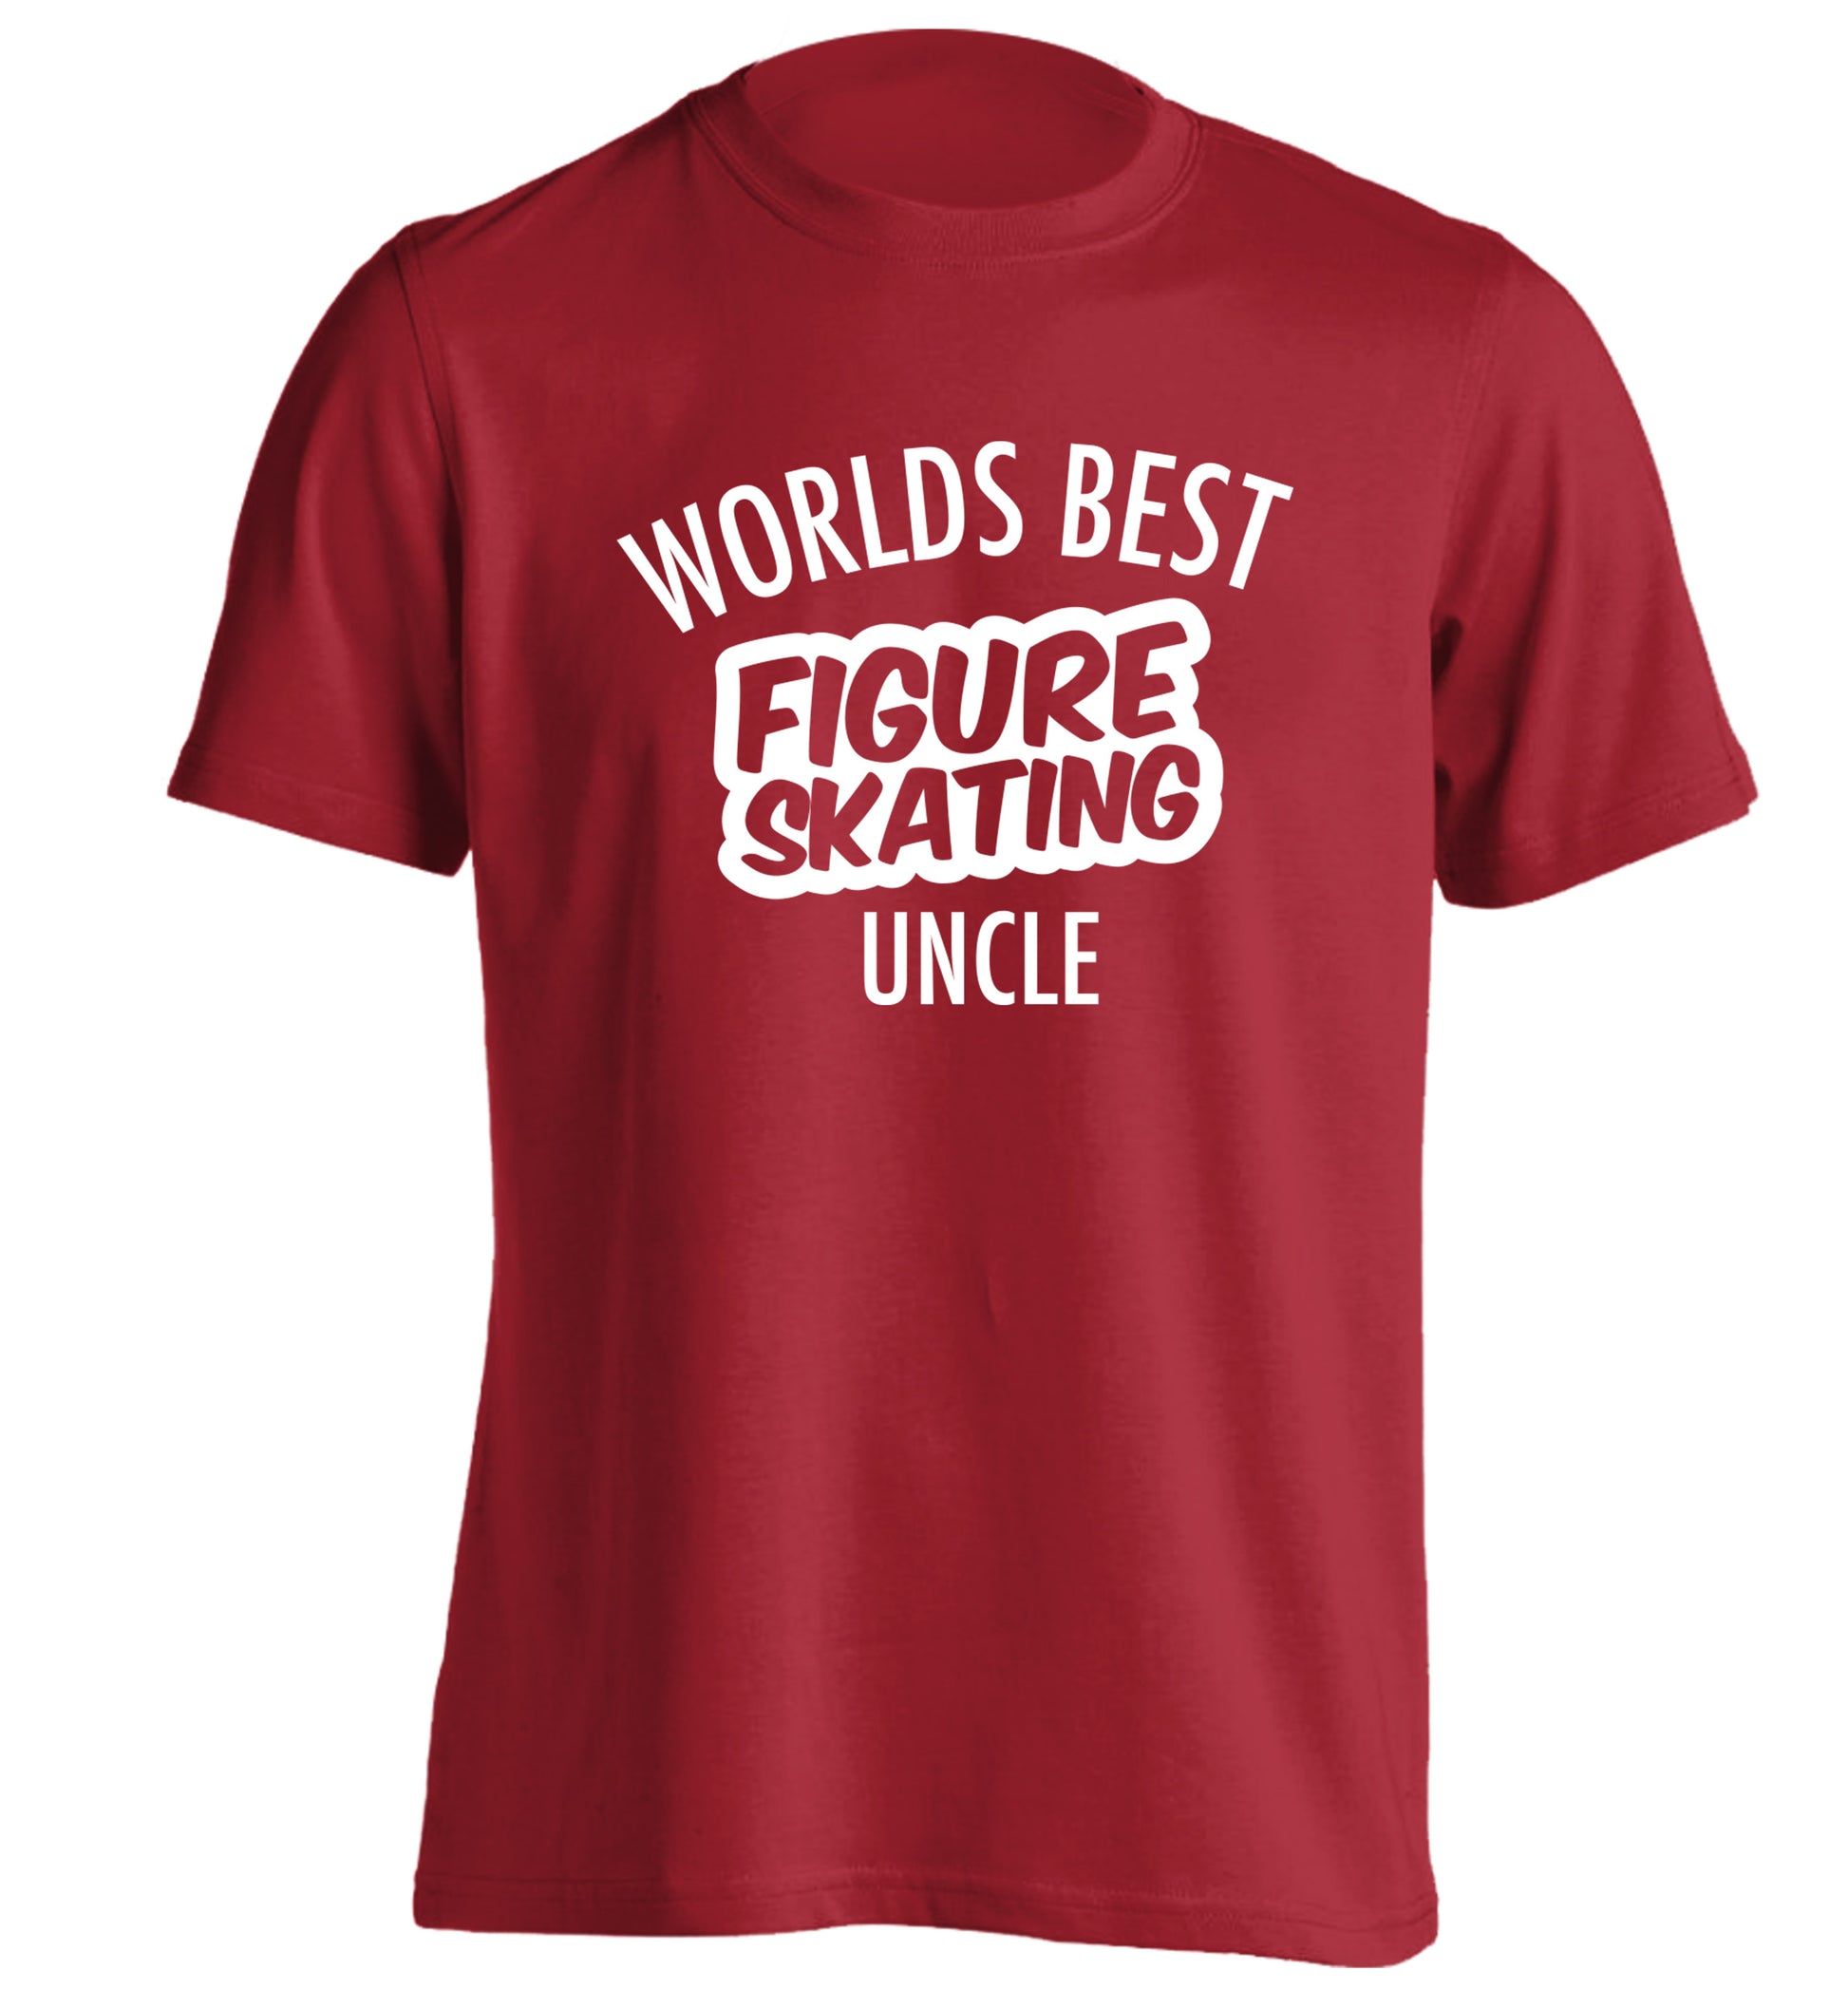 Worlds best figure skating uncle adults unisexred Tshirt 2XL